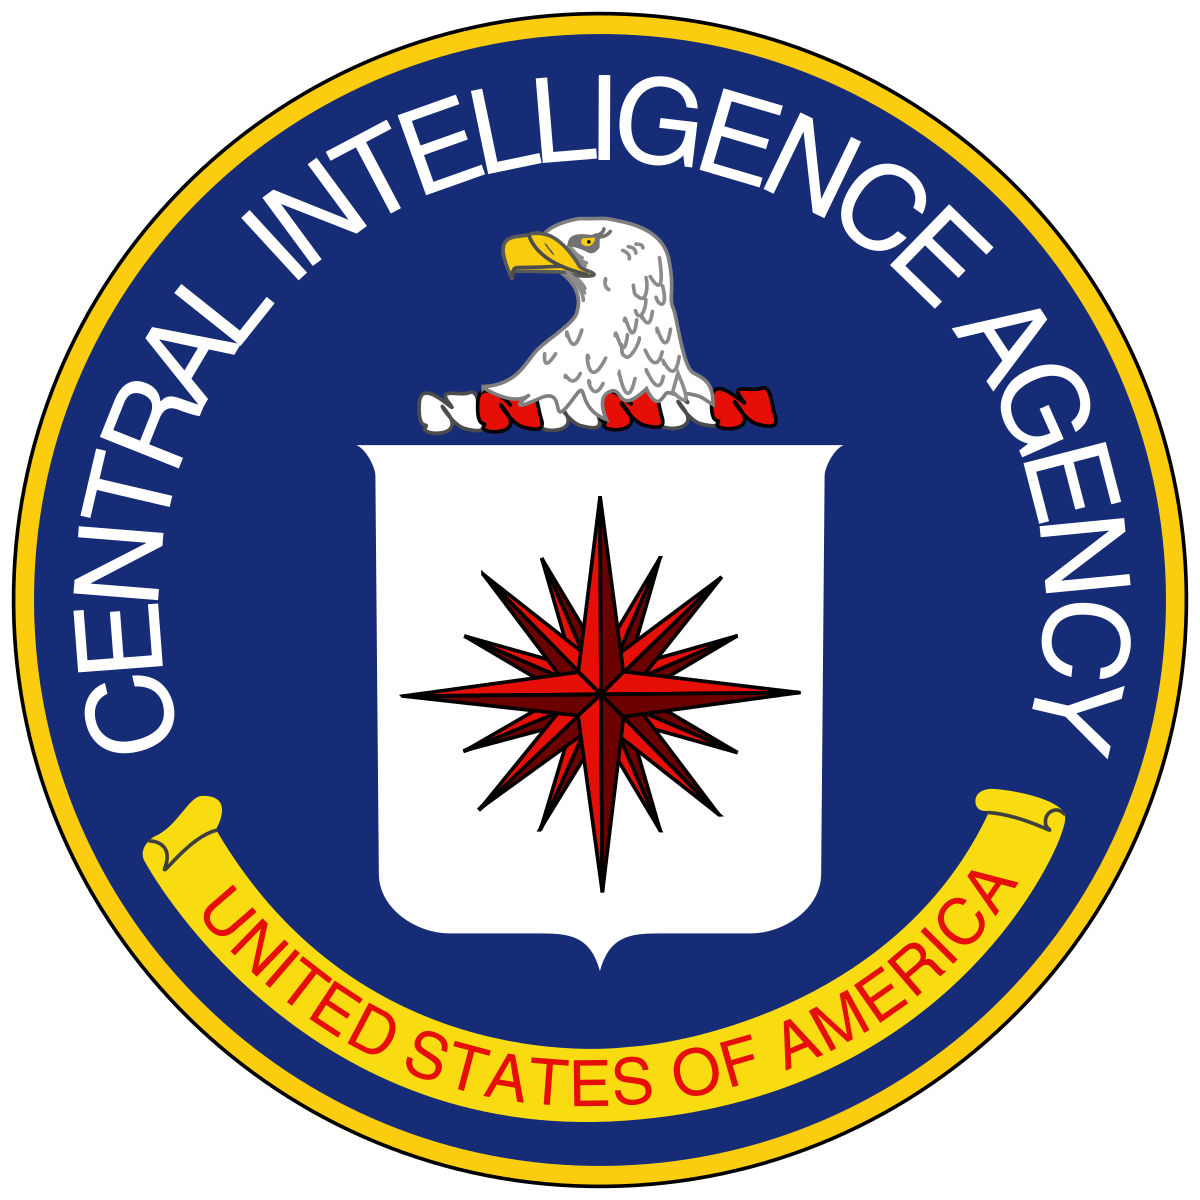 The CIA logo with a transparent background; the logo is a blue circle with an eagle and a red star in the middle, the words CENTRAL INTELLIGENCE AGENCY on the top of the circle, and a yellow banner with red lettering that says UNITED STATES OF AMERICA on the bottom of the circle. The circle is outline in yellow.